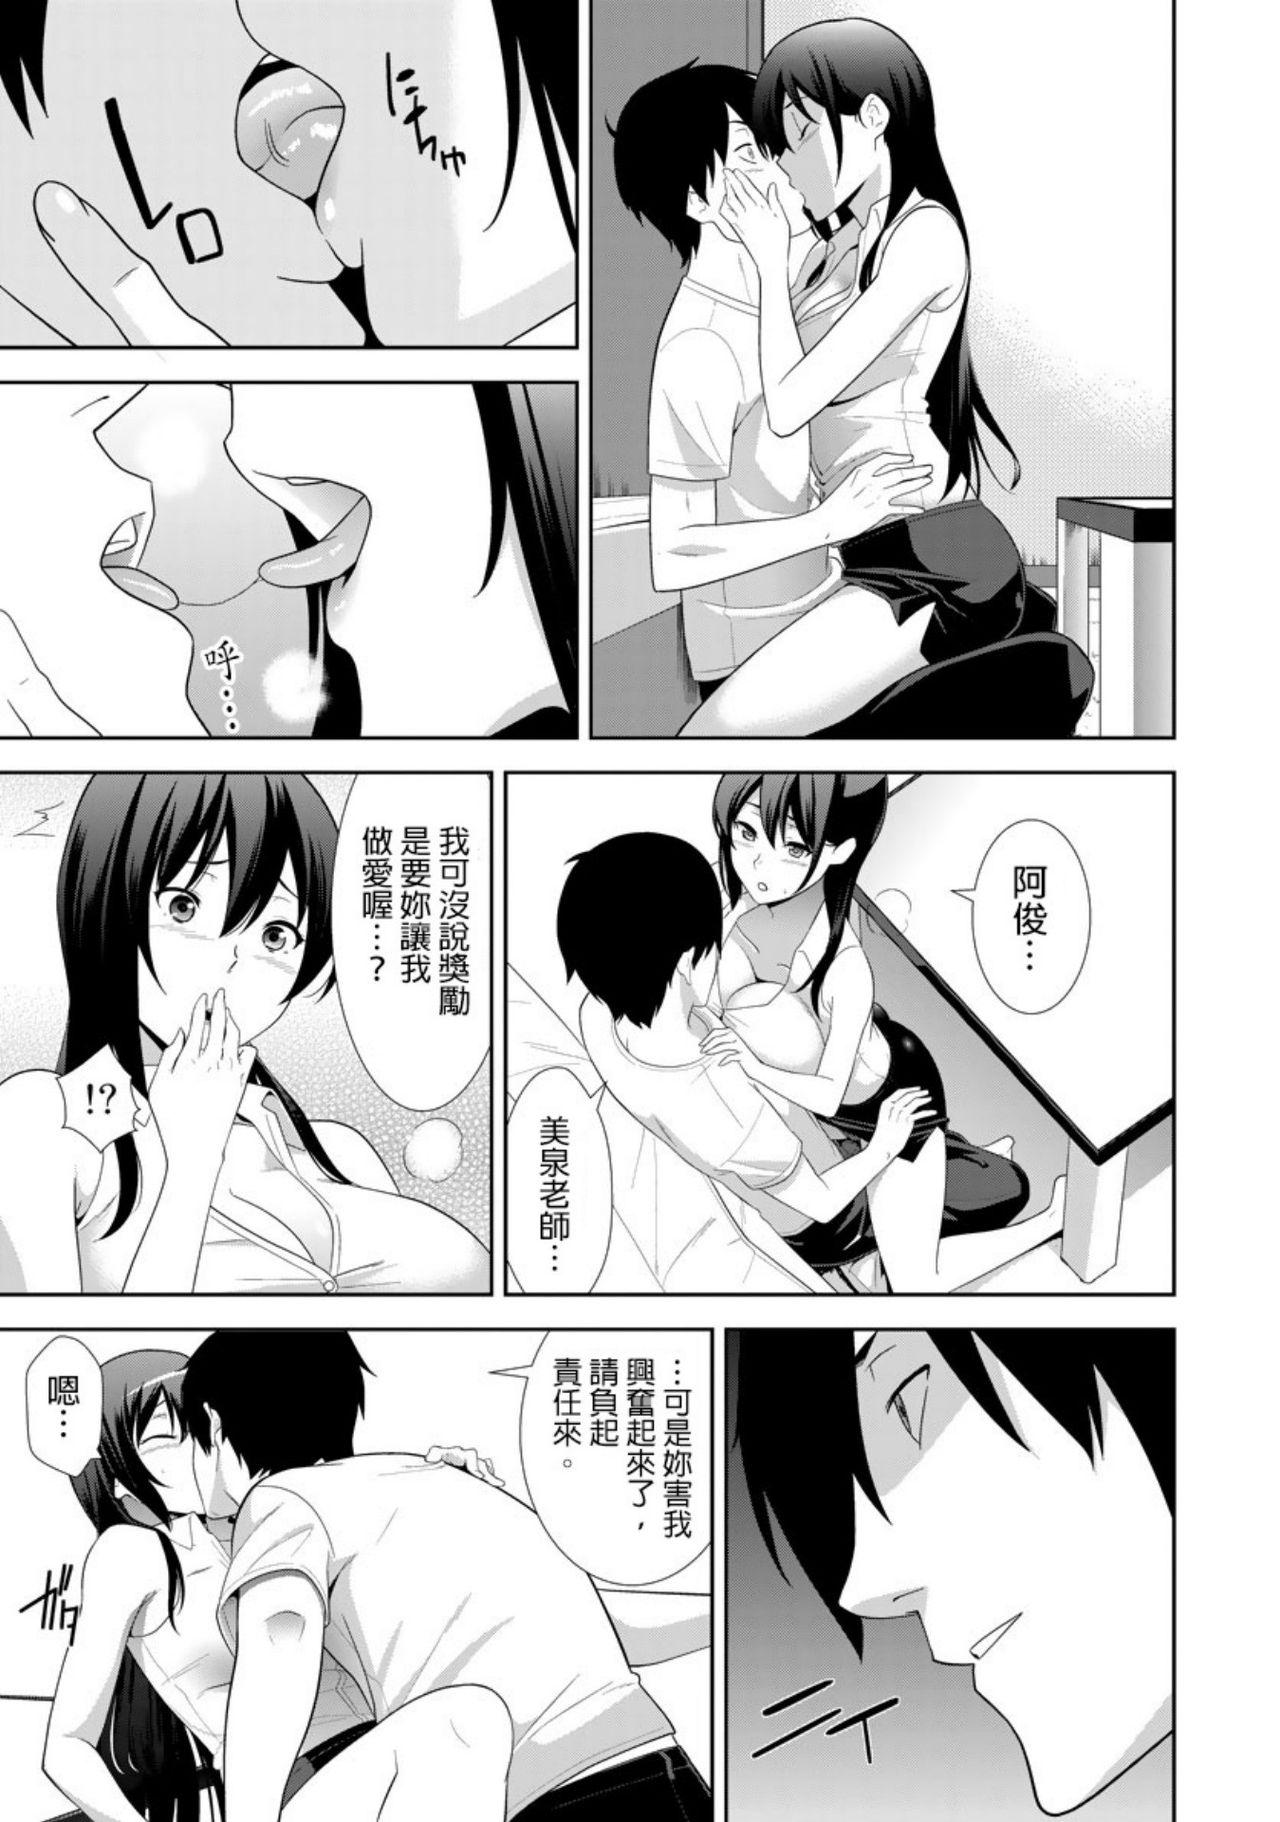 Bubblebutt 教え子に襲ワレル人妻は抵抗できなくて Ch.4 Forwomen - Page 8